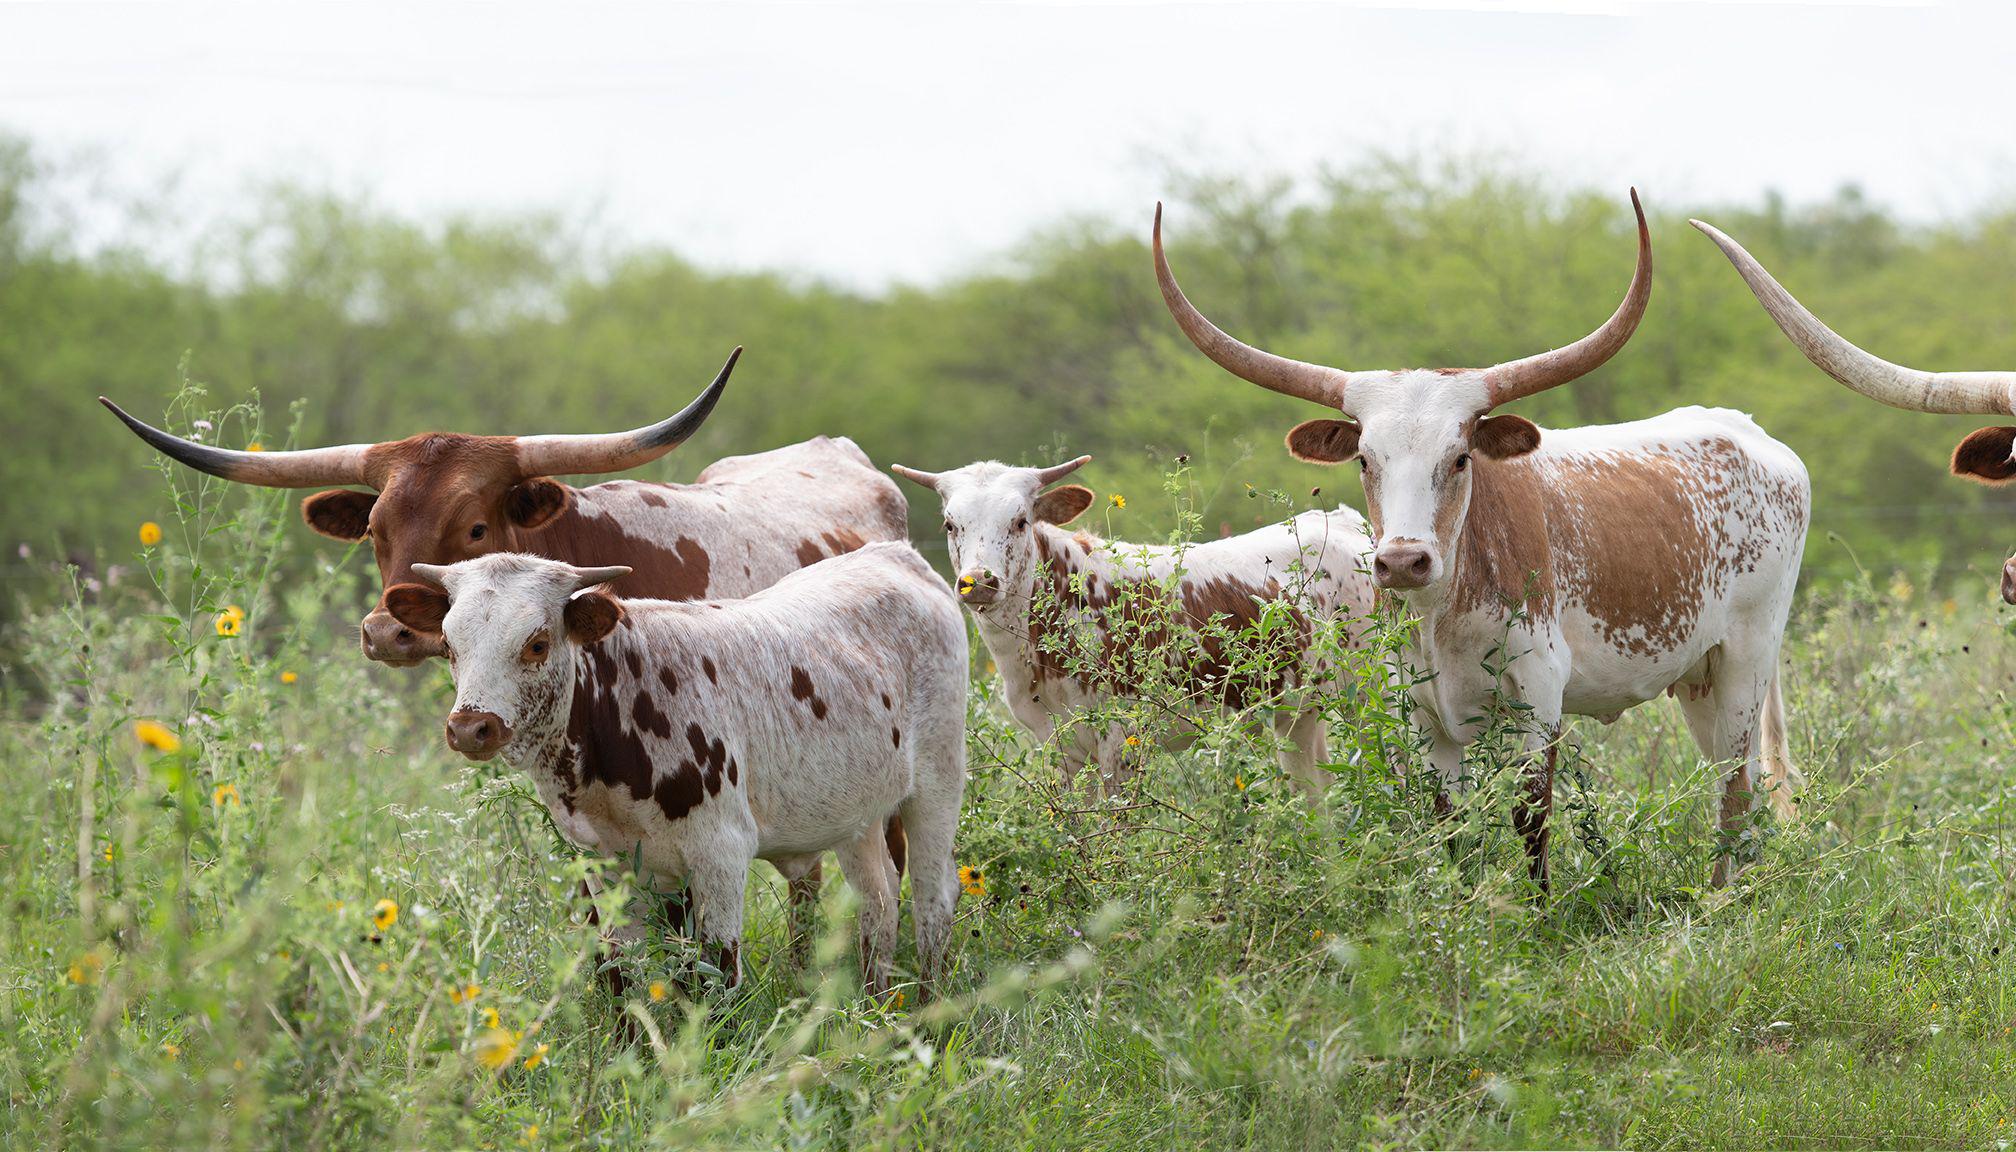 Longhorn Panorama - South Texas longhorn cows at Laborcitas Ranch in green field - Photograph by Lou Vest